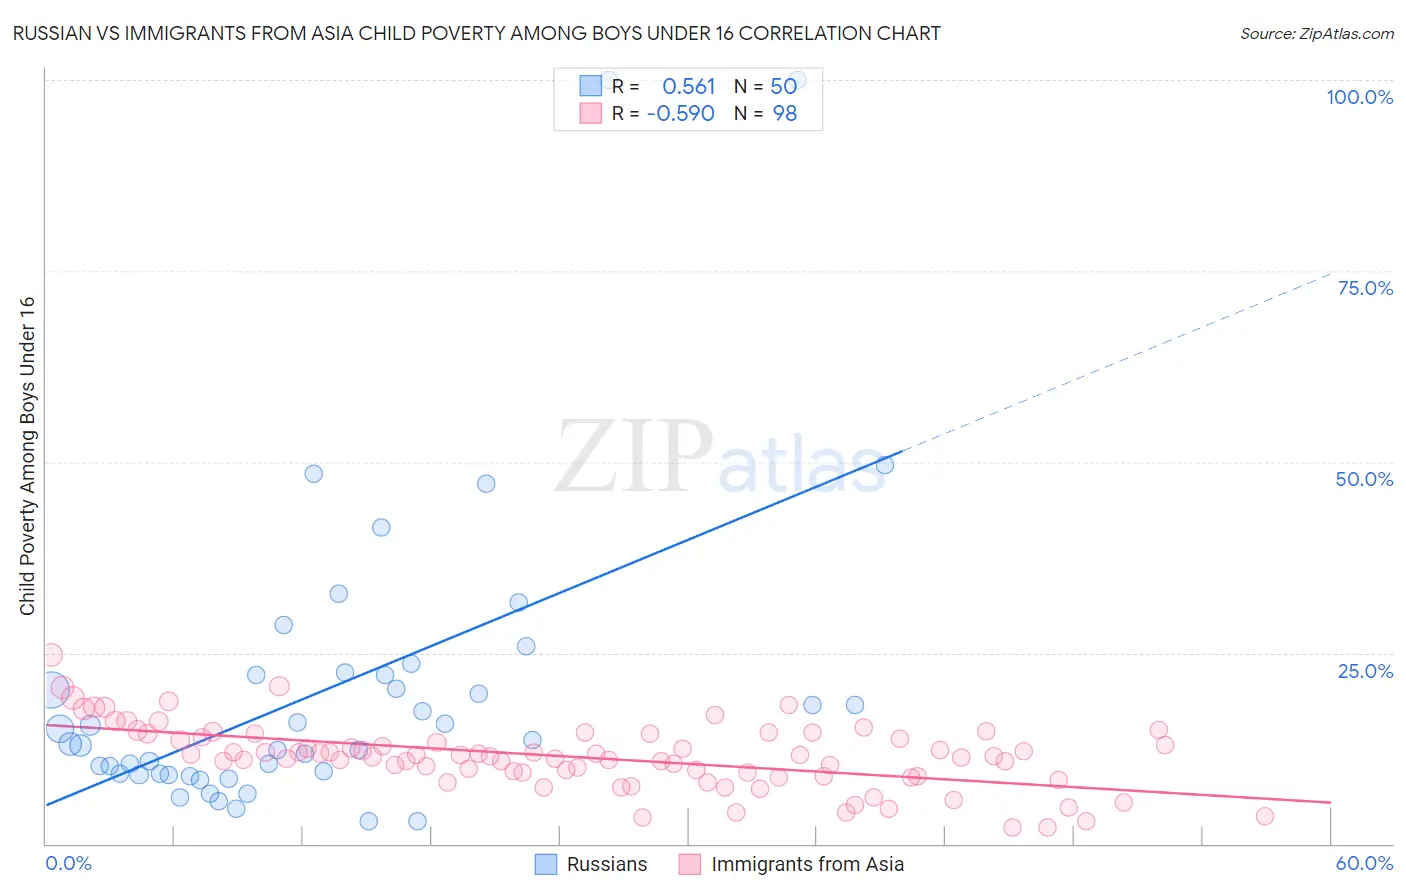 Russian vs Immigrants from Asia Child Poverty Among Boys Under 16